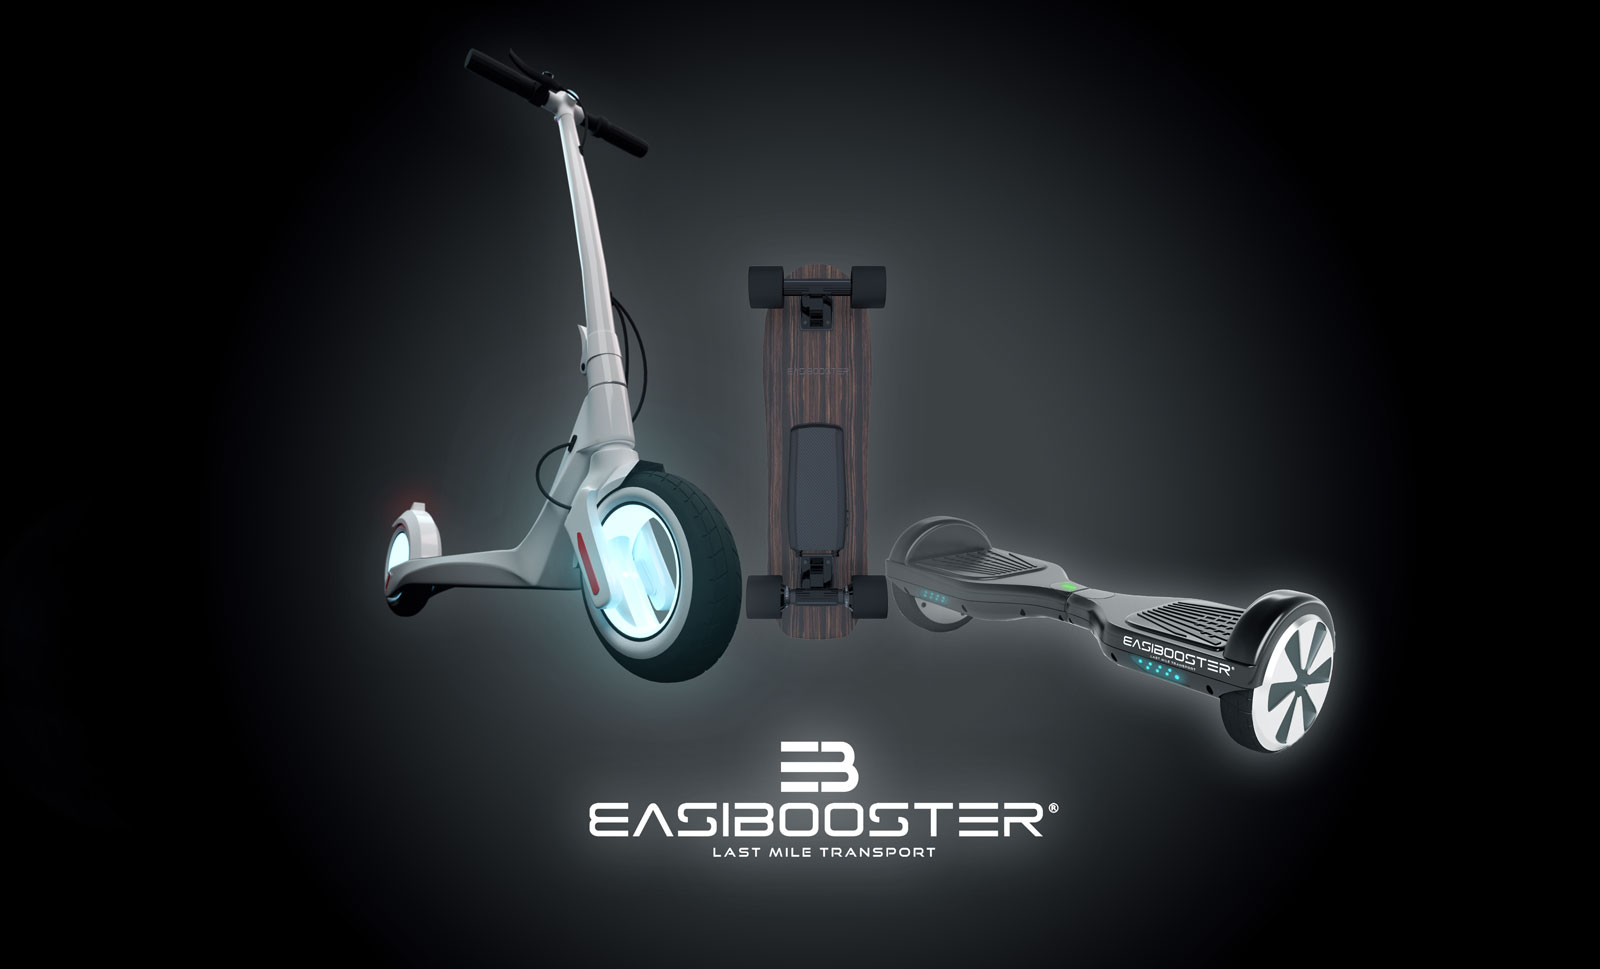 EasiBooster | Buy Electric Hoverboards and Skateboards EasiBooster Blog | How to Ride an Skateboard Safely?